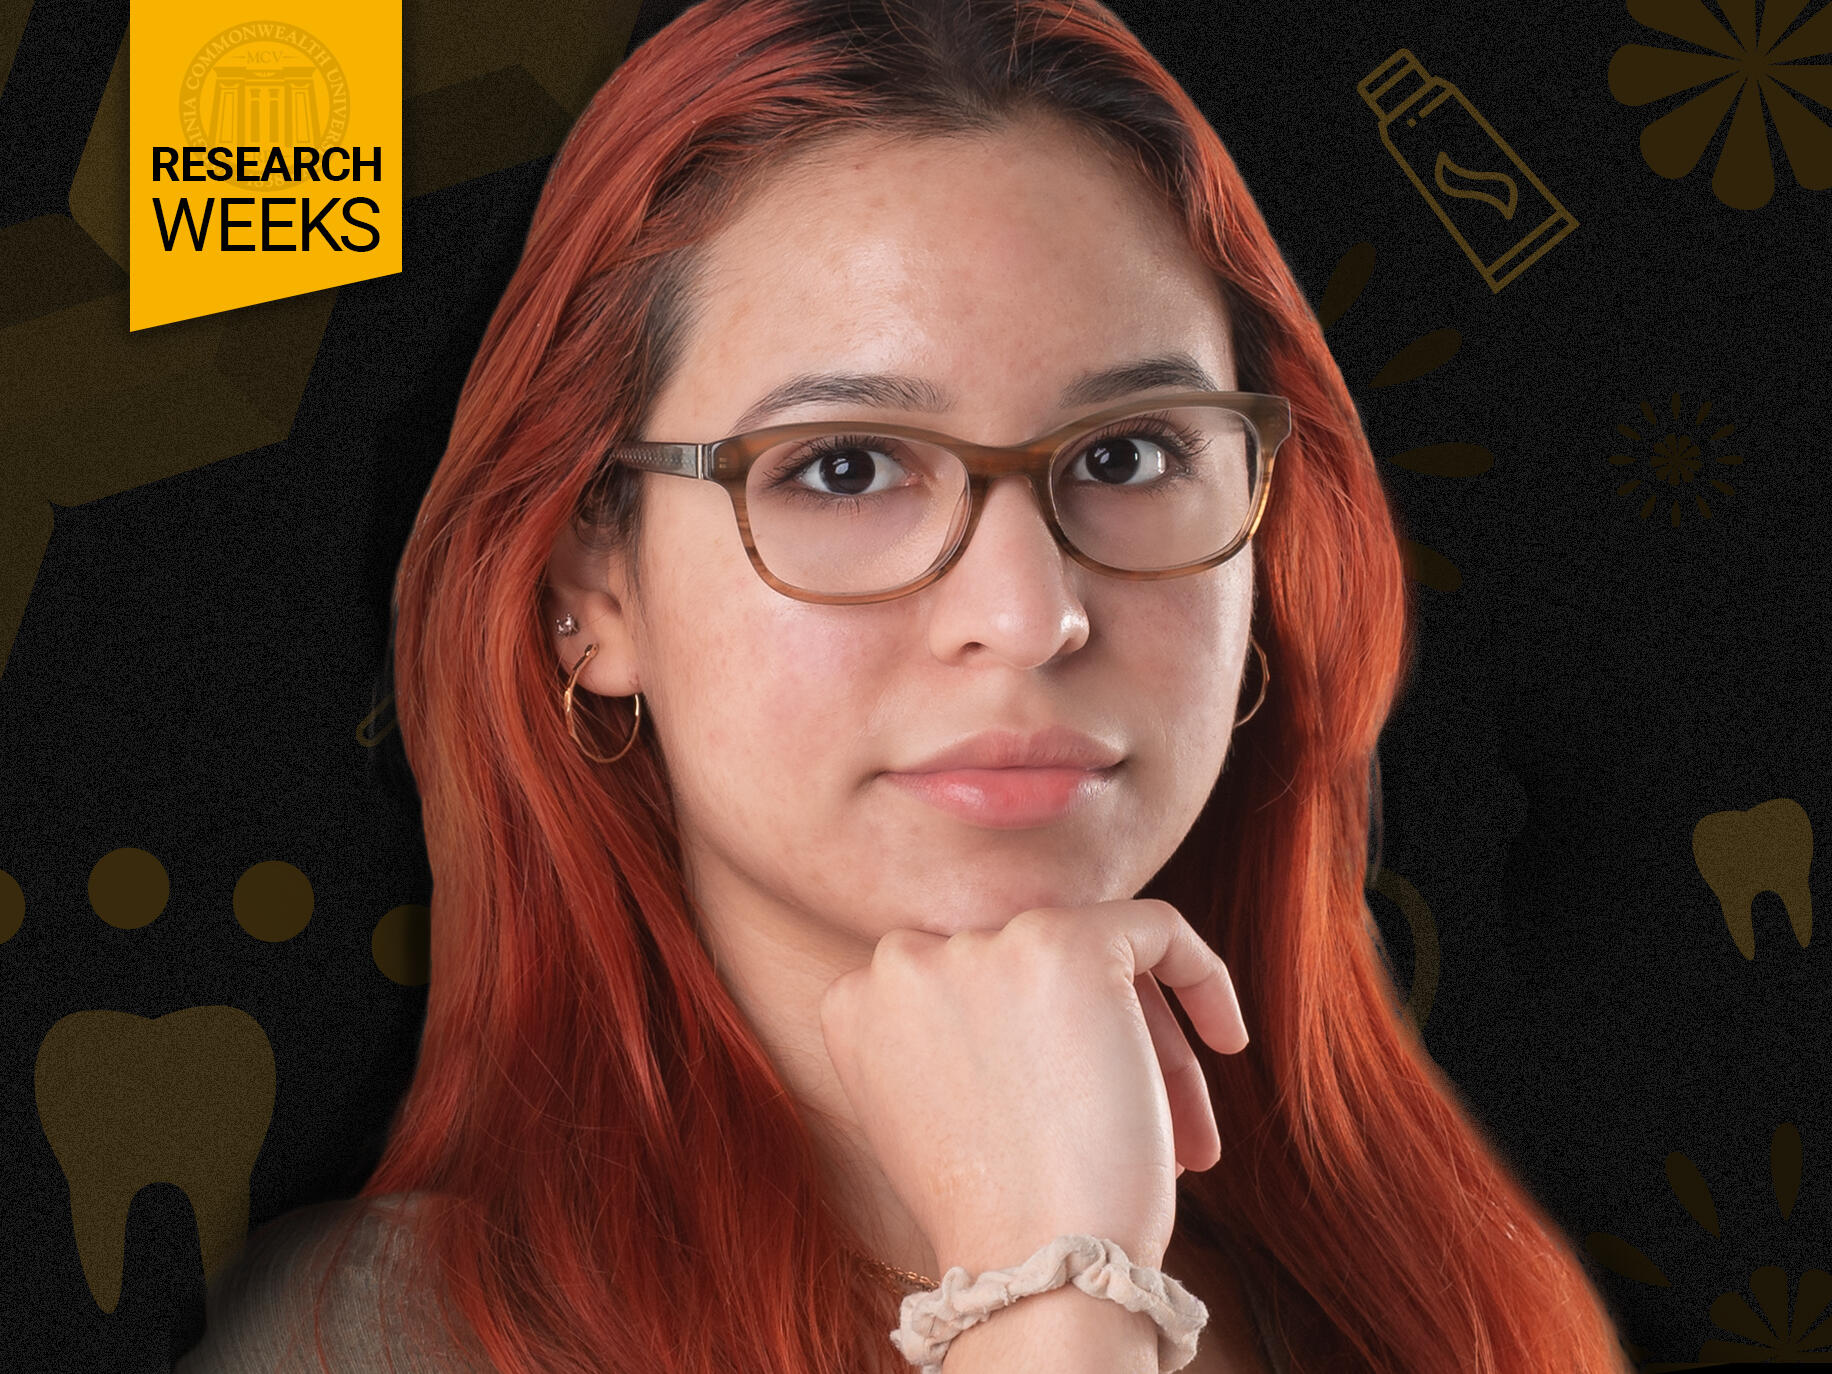 Jenifer Nunez looking at the camera with her hand under her chin. In the upper left corner is a yellow tab that says \"Research Weeks\" in black text.